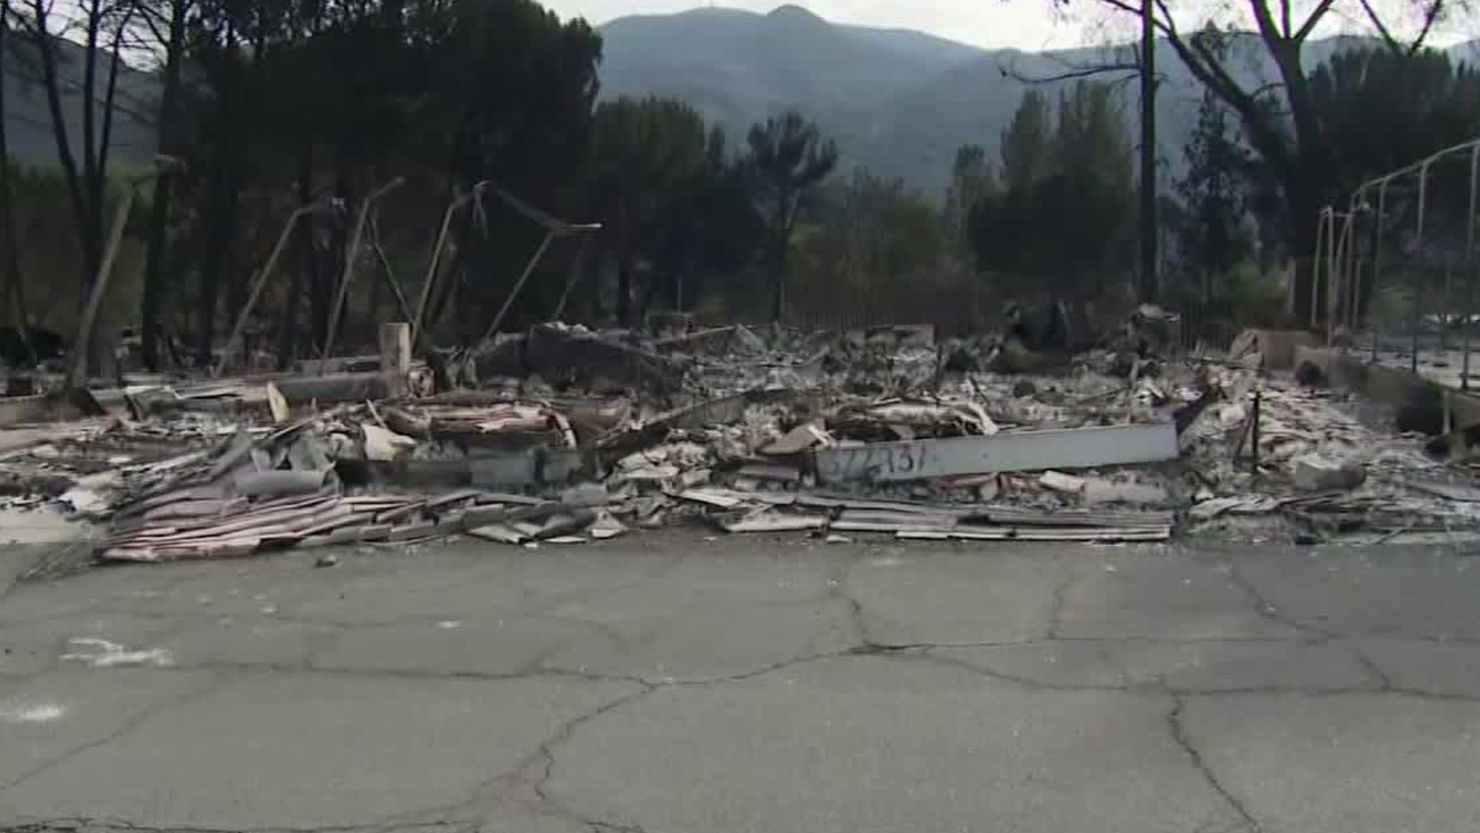 Meissner's home is now a pile of debris after it was destroyed by the Woolsey Fire.